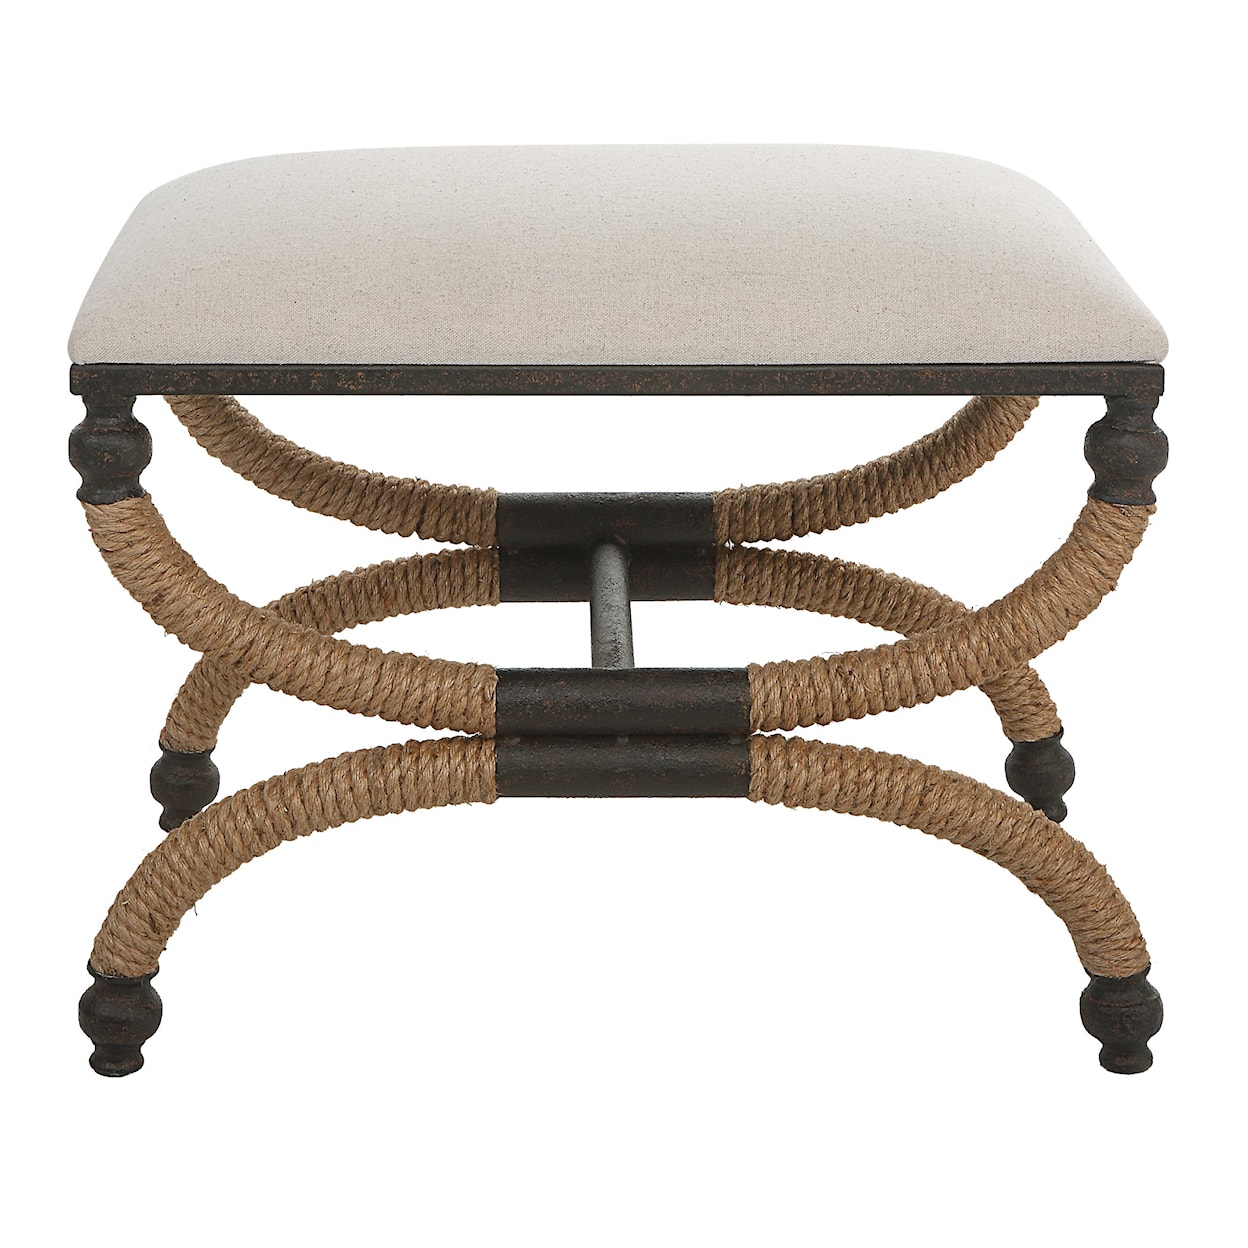 Uttermost Icaria Icaria Upholstered Small Bench